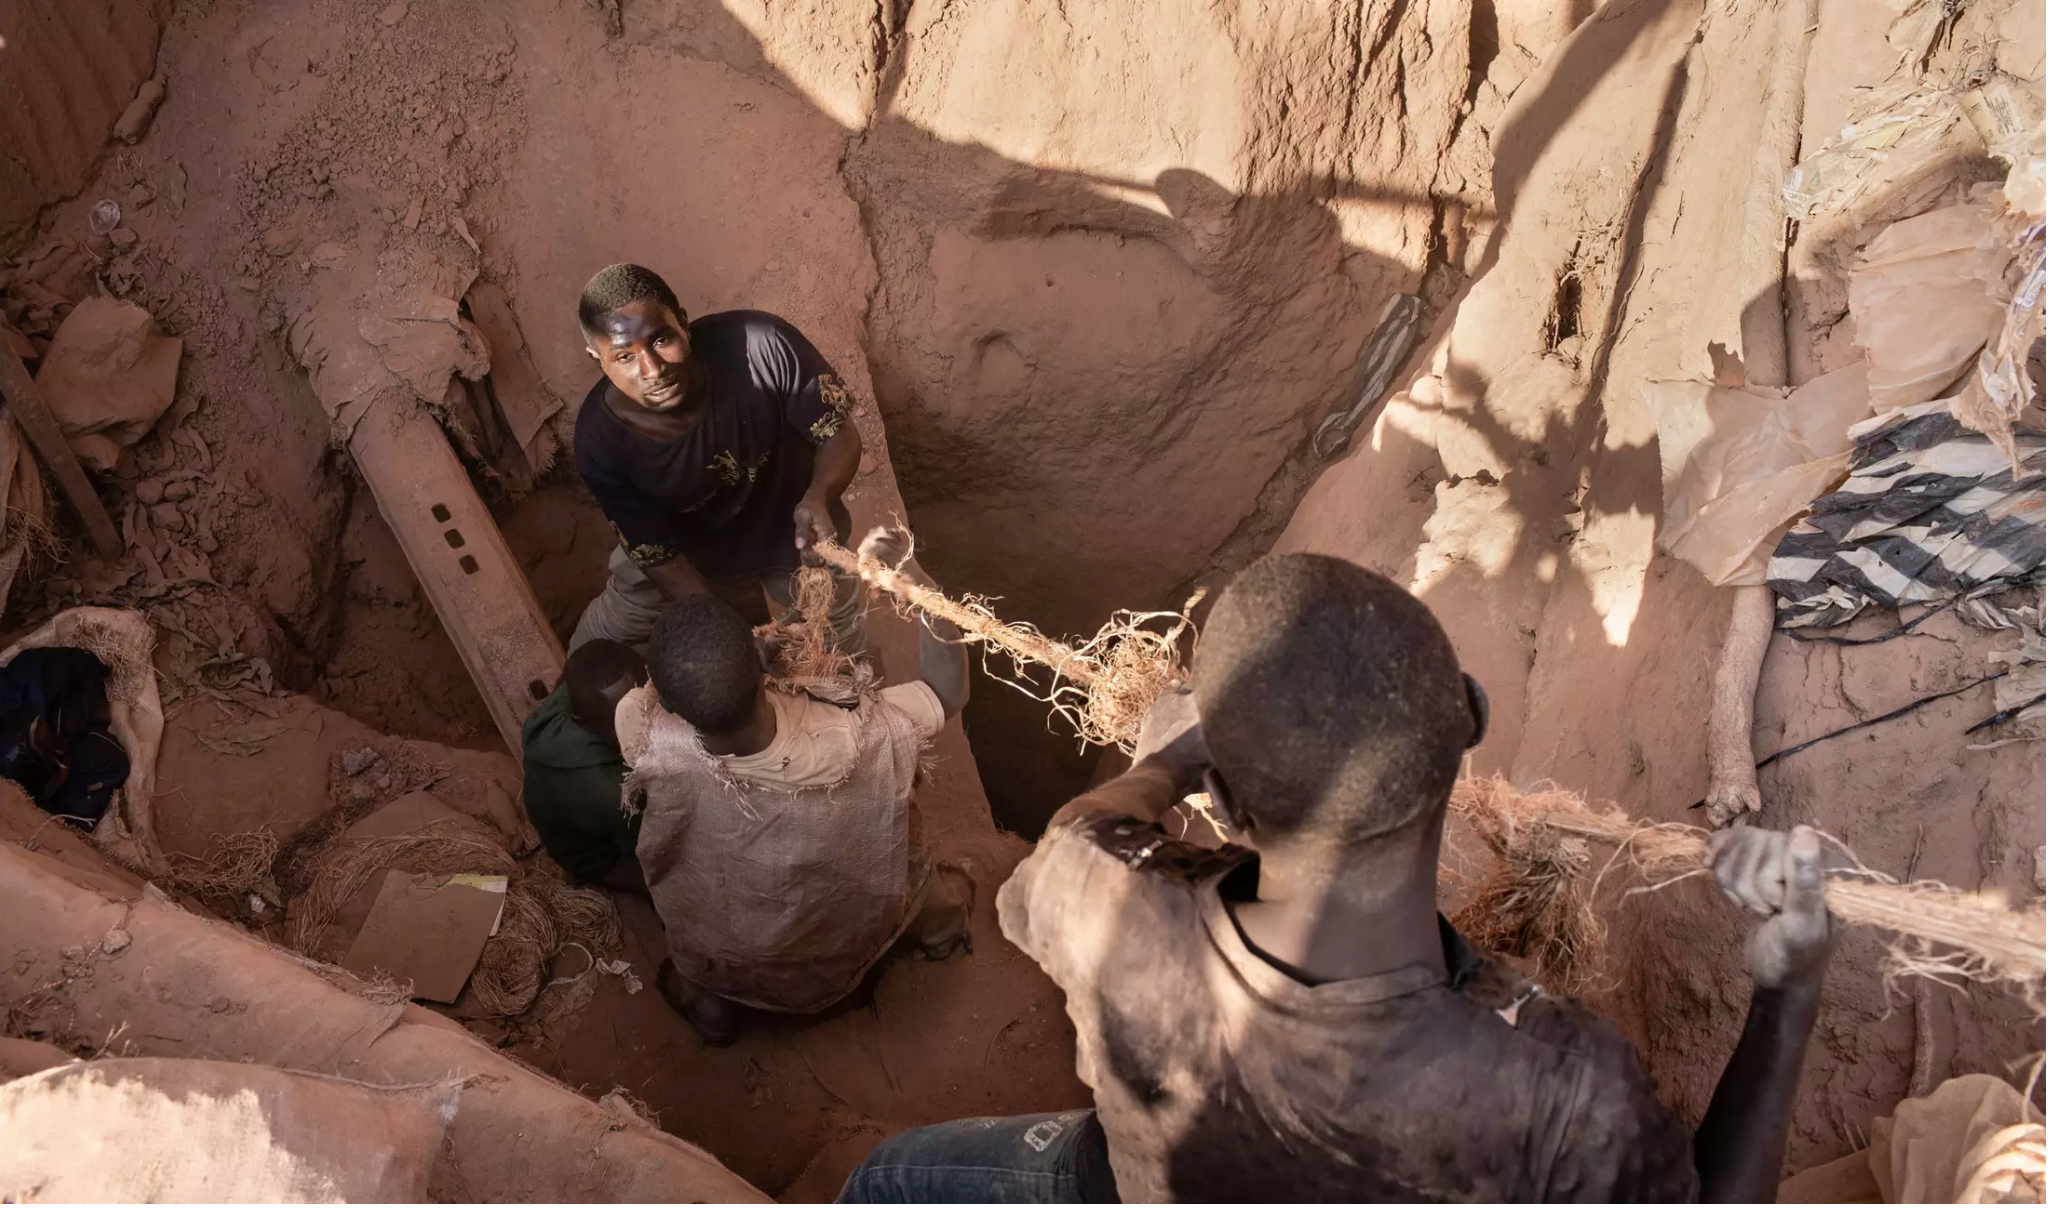 Miners pulling up a bag of cobalt inside the Kasulo mine near Kolwezi in the Democratic Republic of the Congo. Image by Sebastian Meyer. Democratic Republic of Congo, 2018.